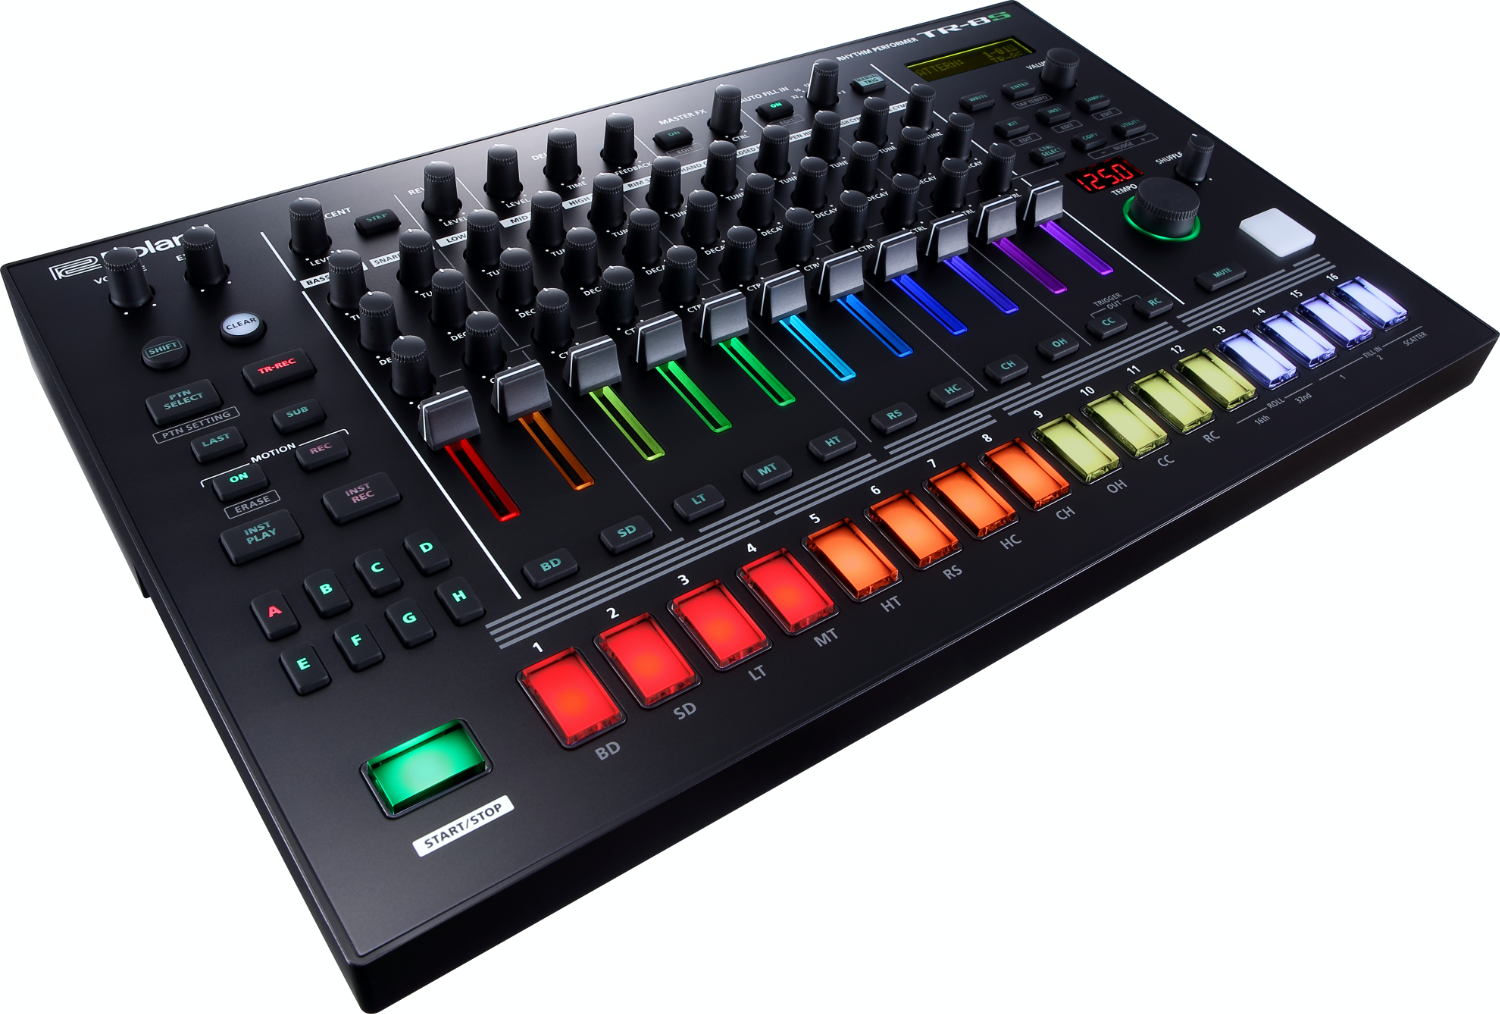 Roland releases version 2.0 update for the TR-8S Rhythm Performer